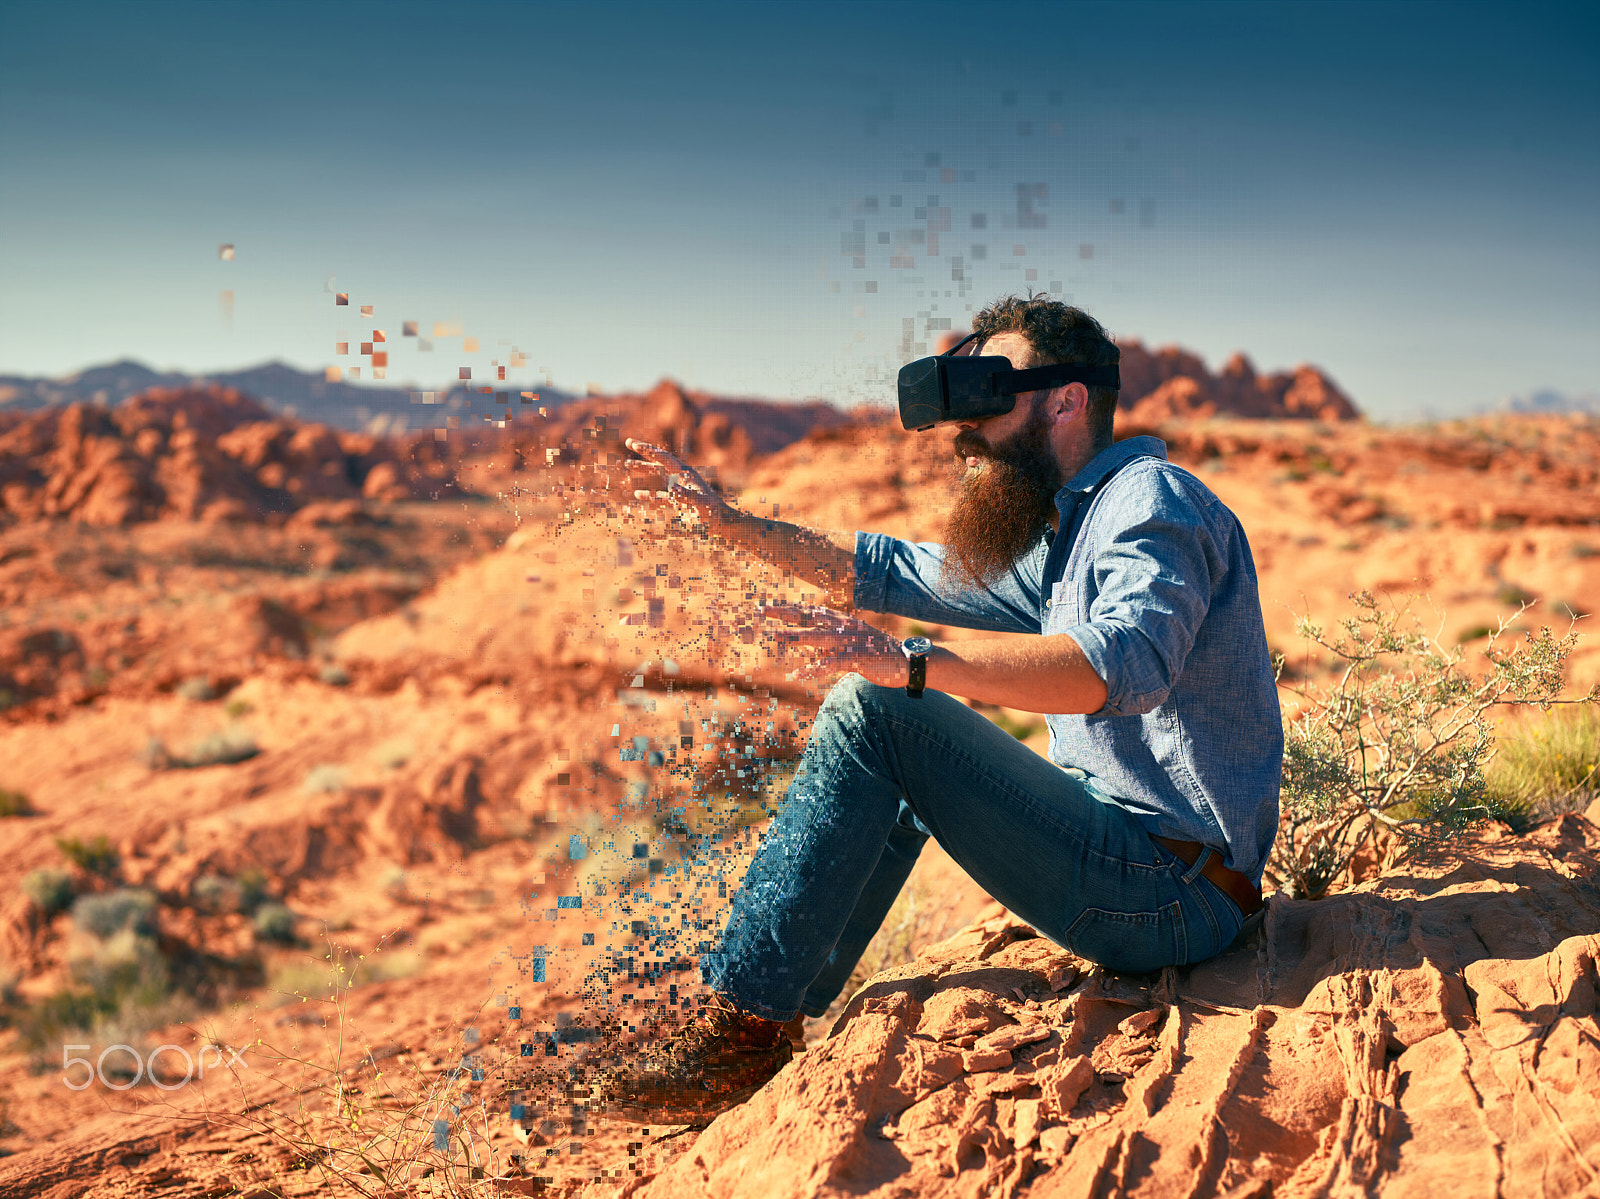 Phase One P65+ sample photo. Cool bearded guy wearing vr goggles in nevada desert with digita photography